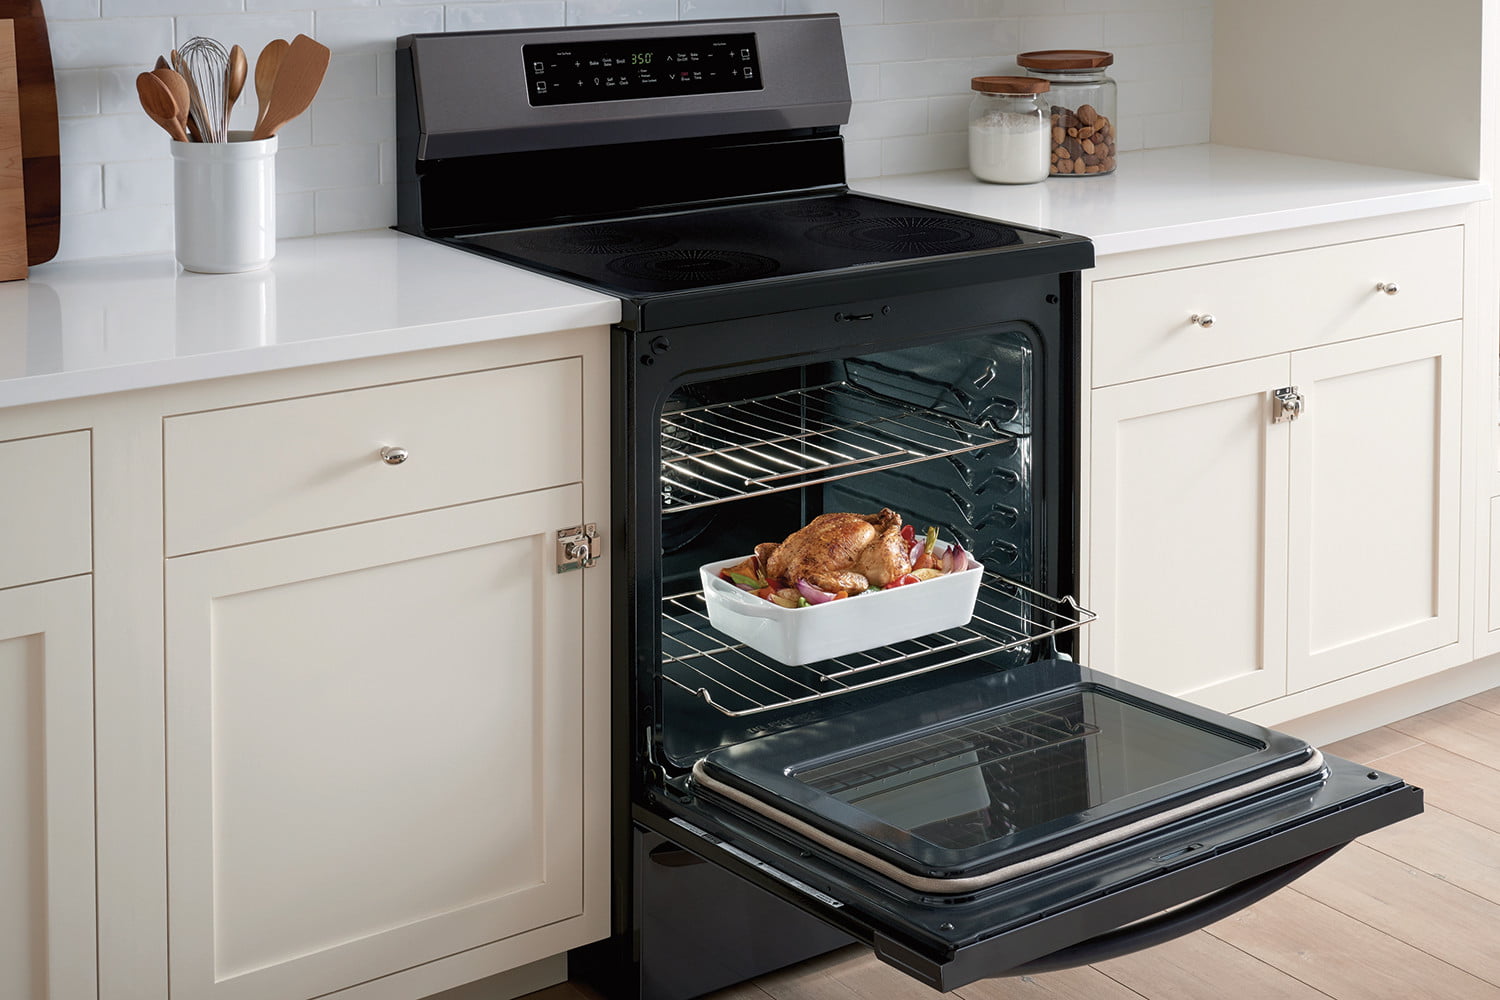 Best cheap oven deals in May 2021